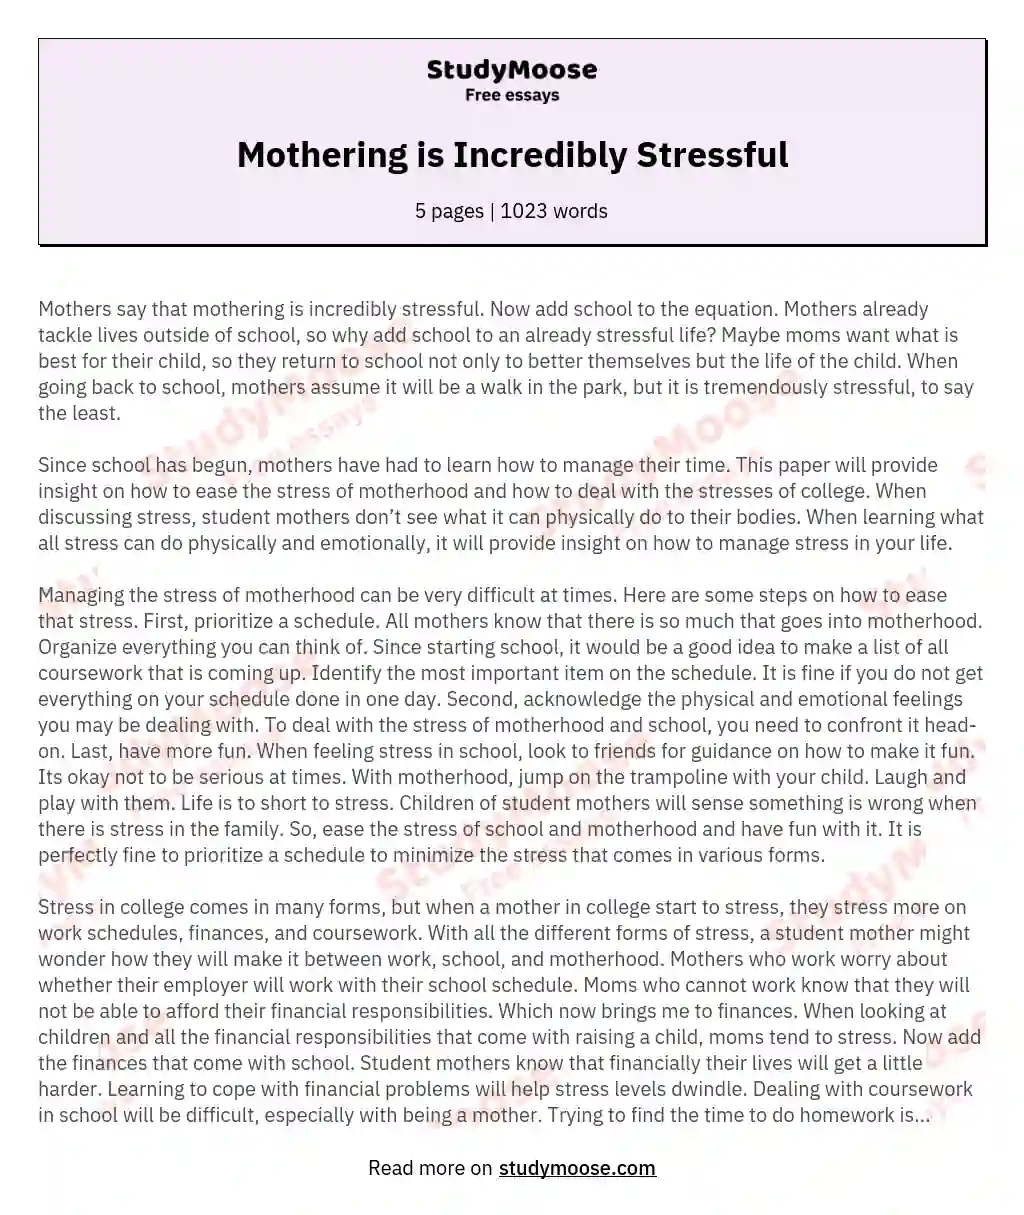 Mothering is Incredibly Stressful essay